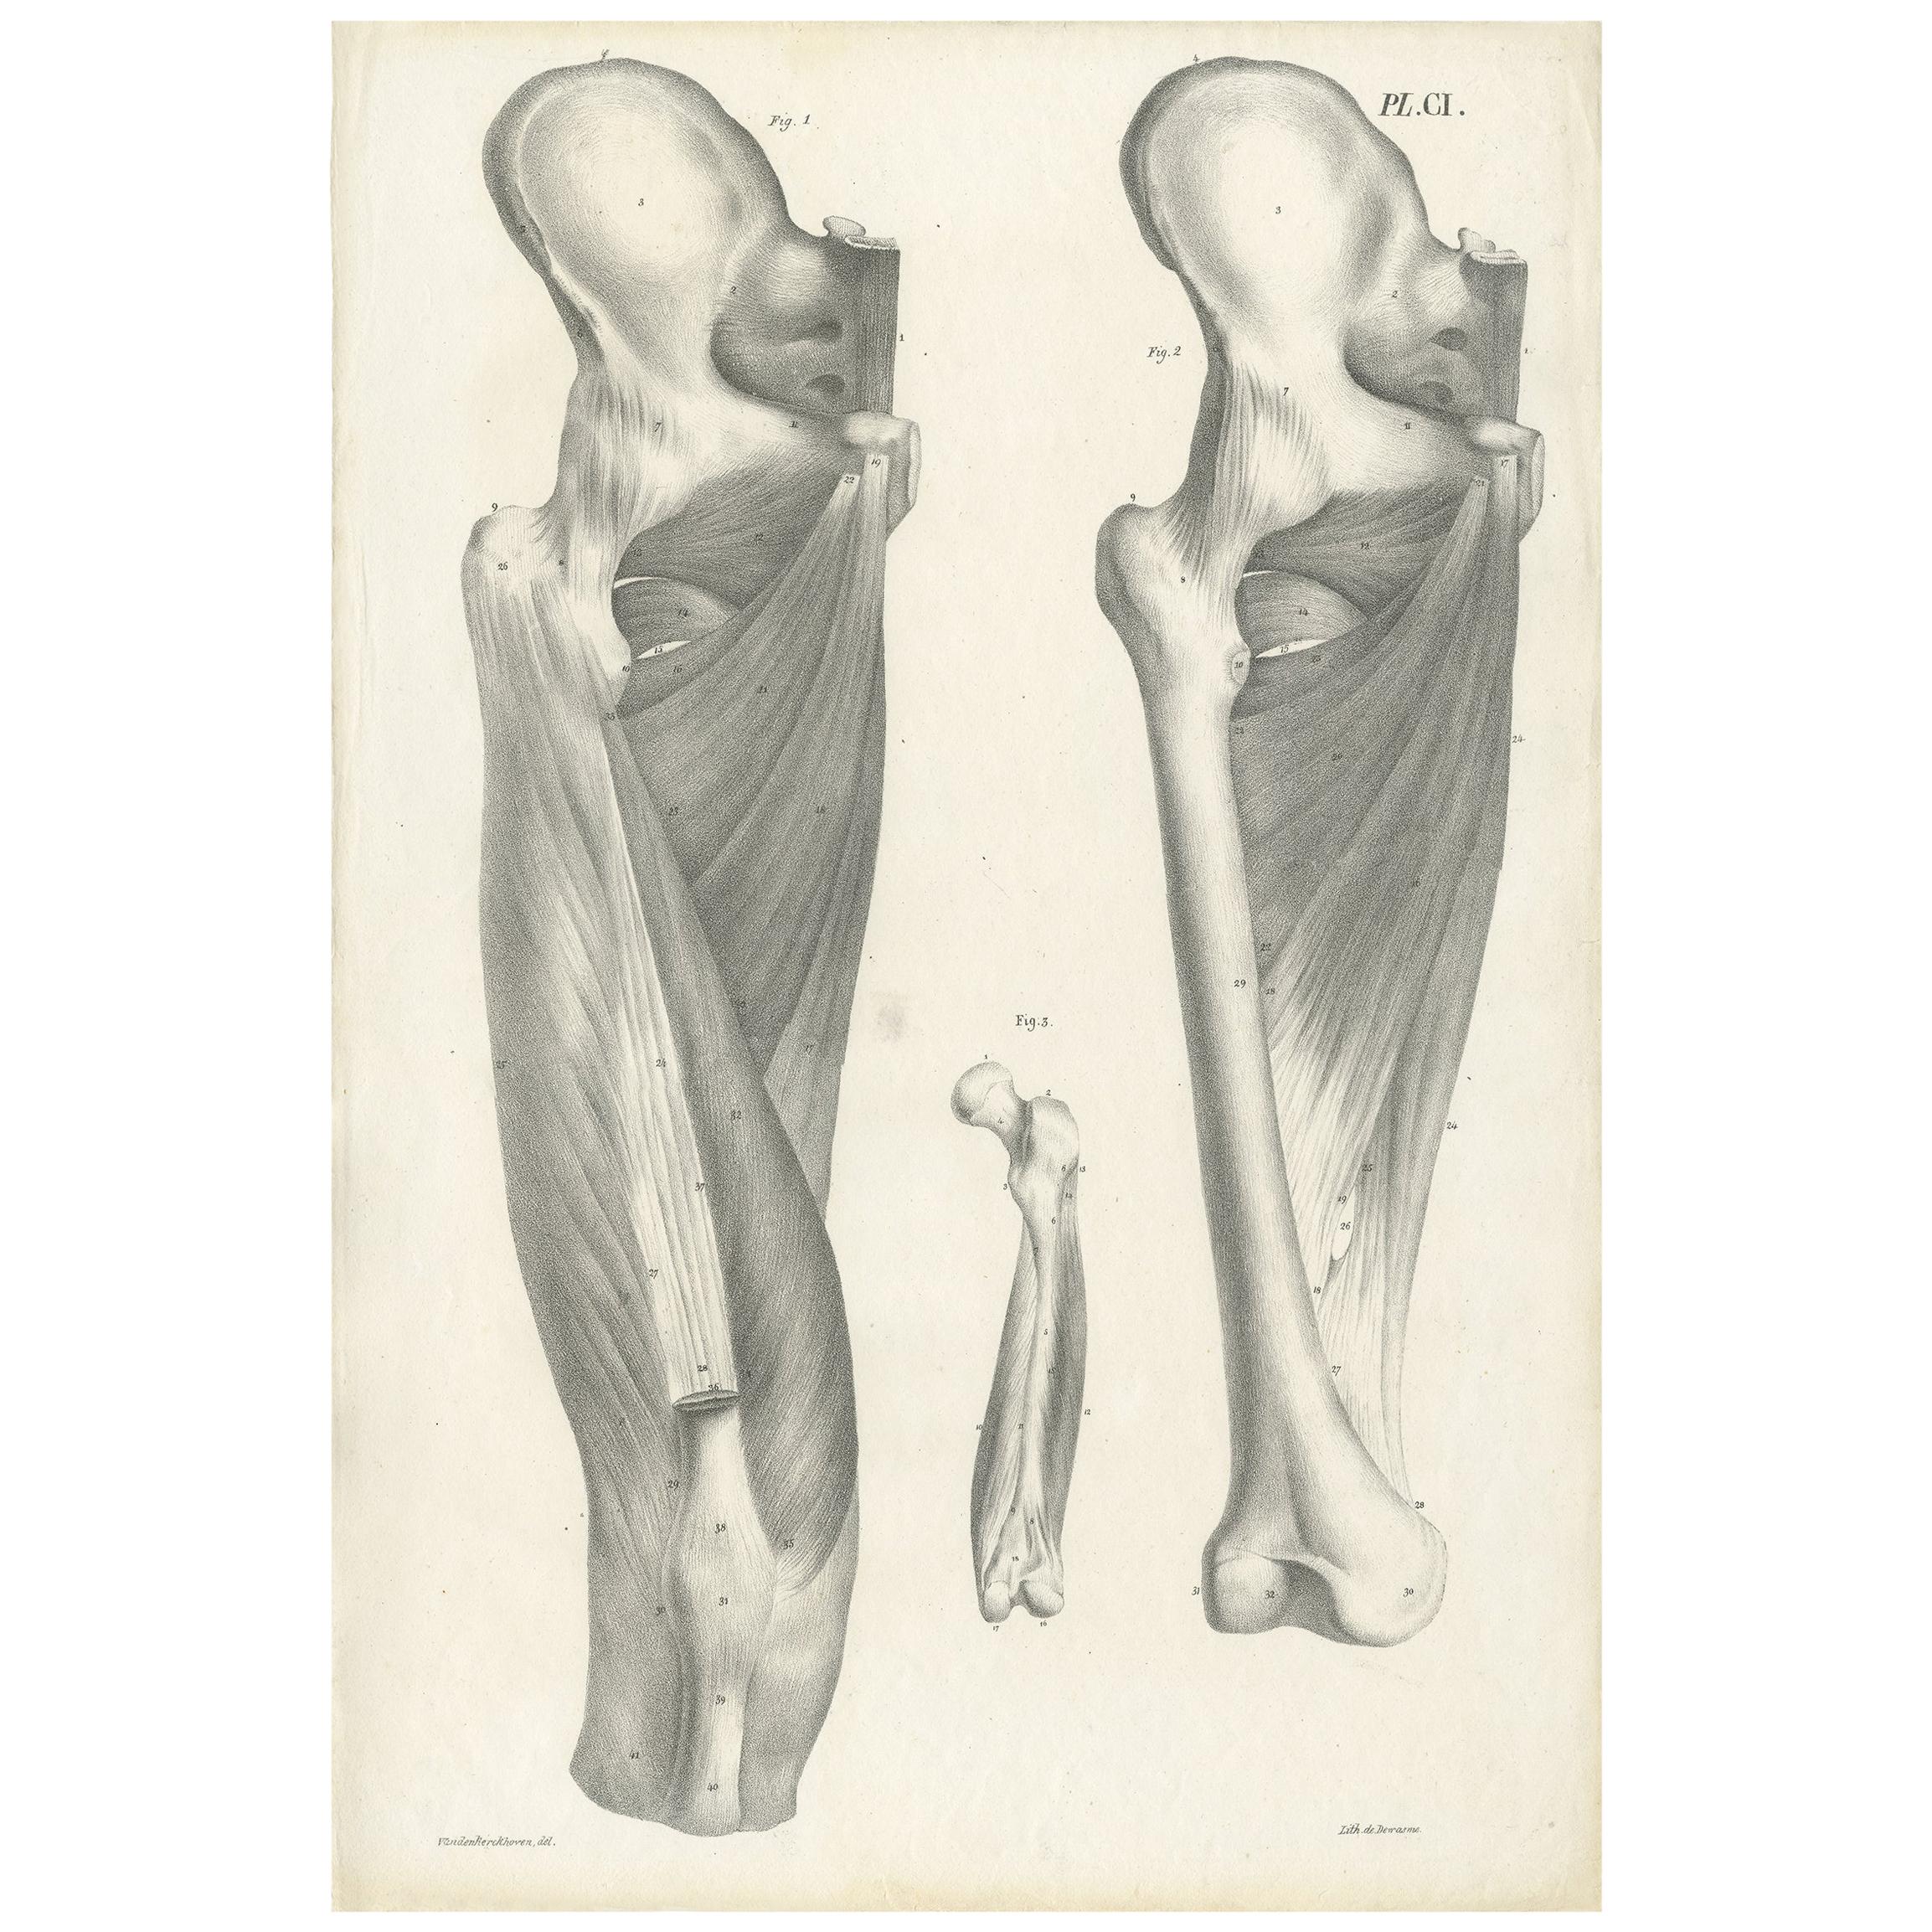 Pl. CI Antique Anatomy / Medical Print of the Thigh by Cloquet, '1821'